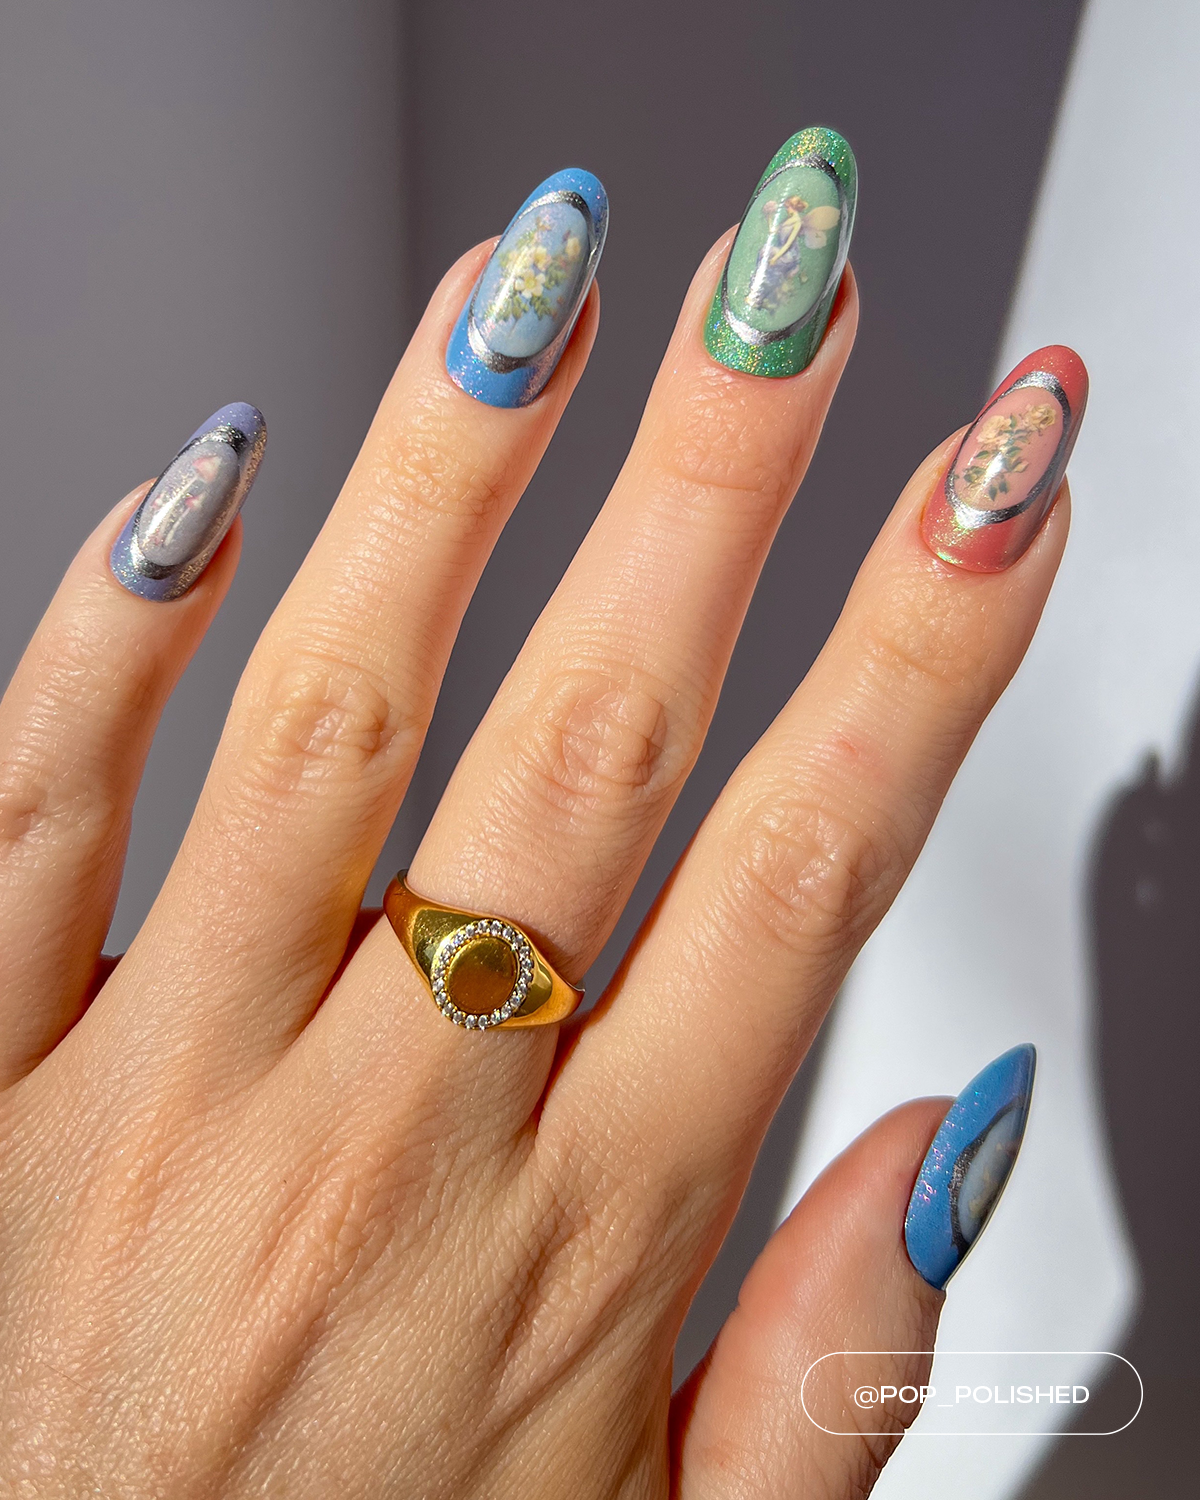 Once Upon a Time Nail Art Tattoos